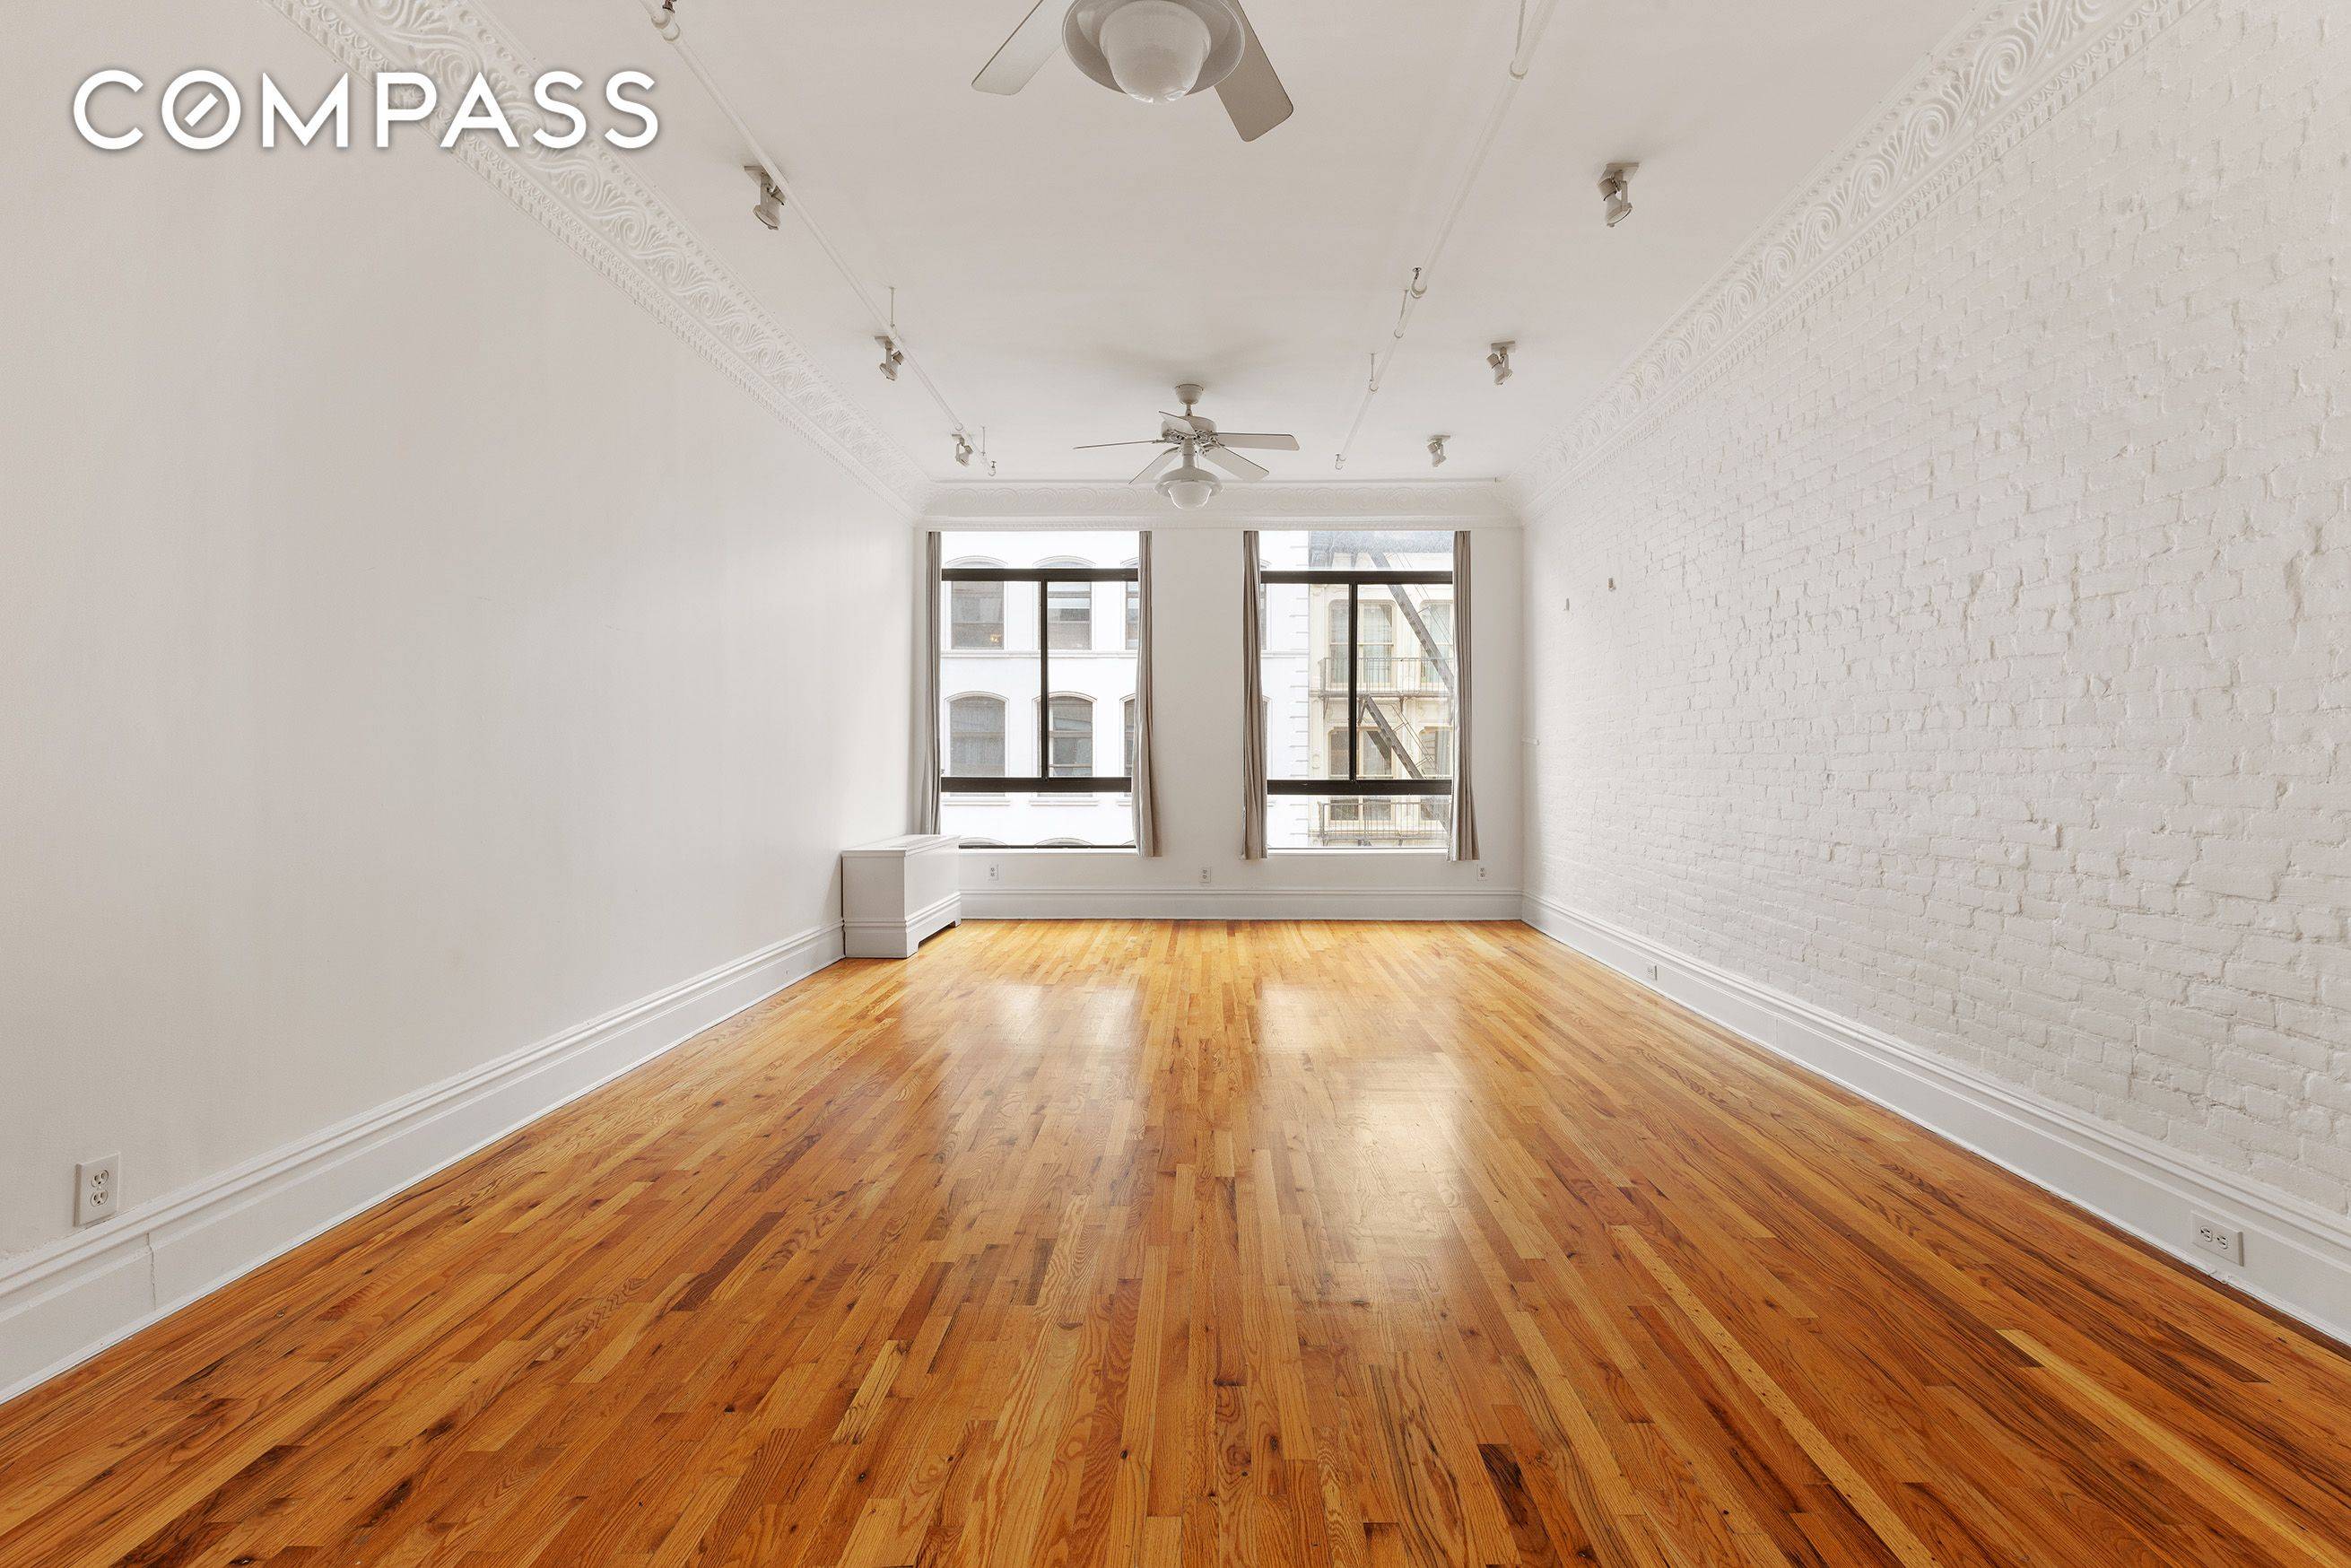 Welcome to this exquisite 2 bedroom, 2 bath loft nestled on a charming block in Tribeca.